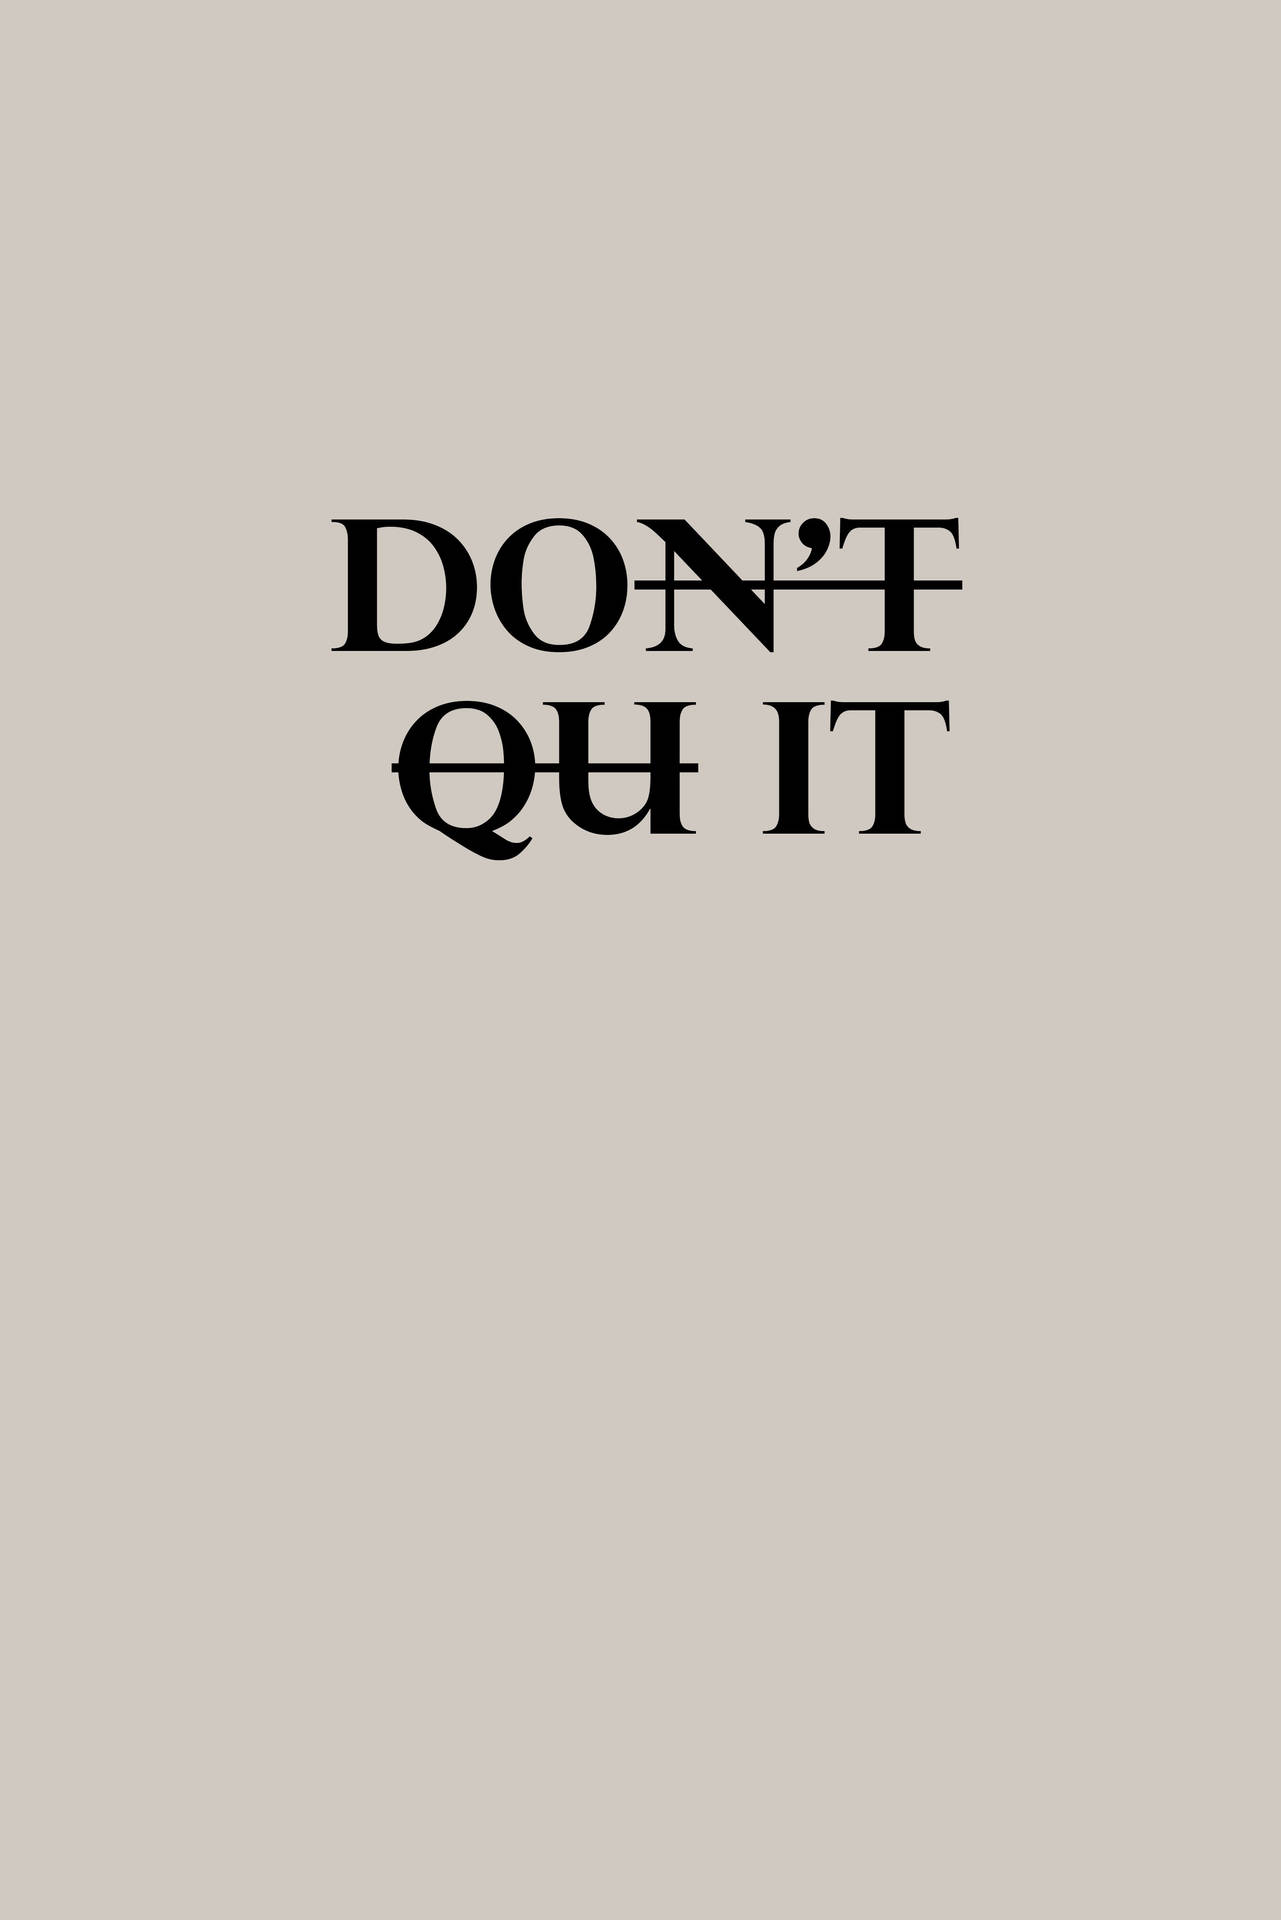 Don't Quit Minimalistic Cute Positive Quotes Background